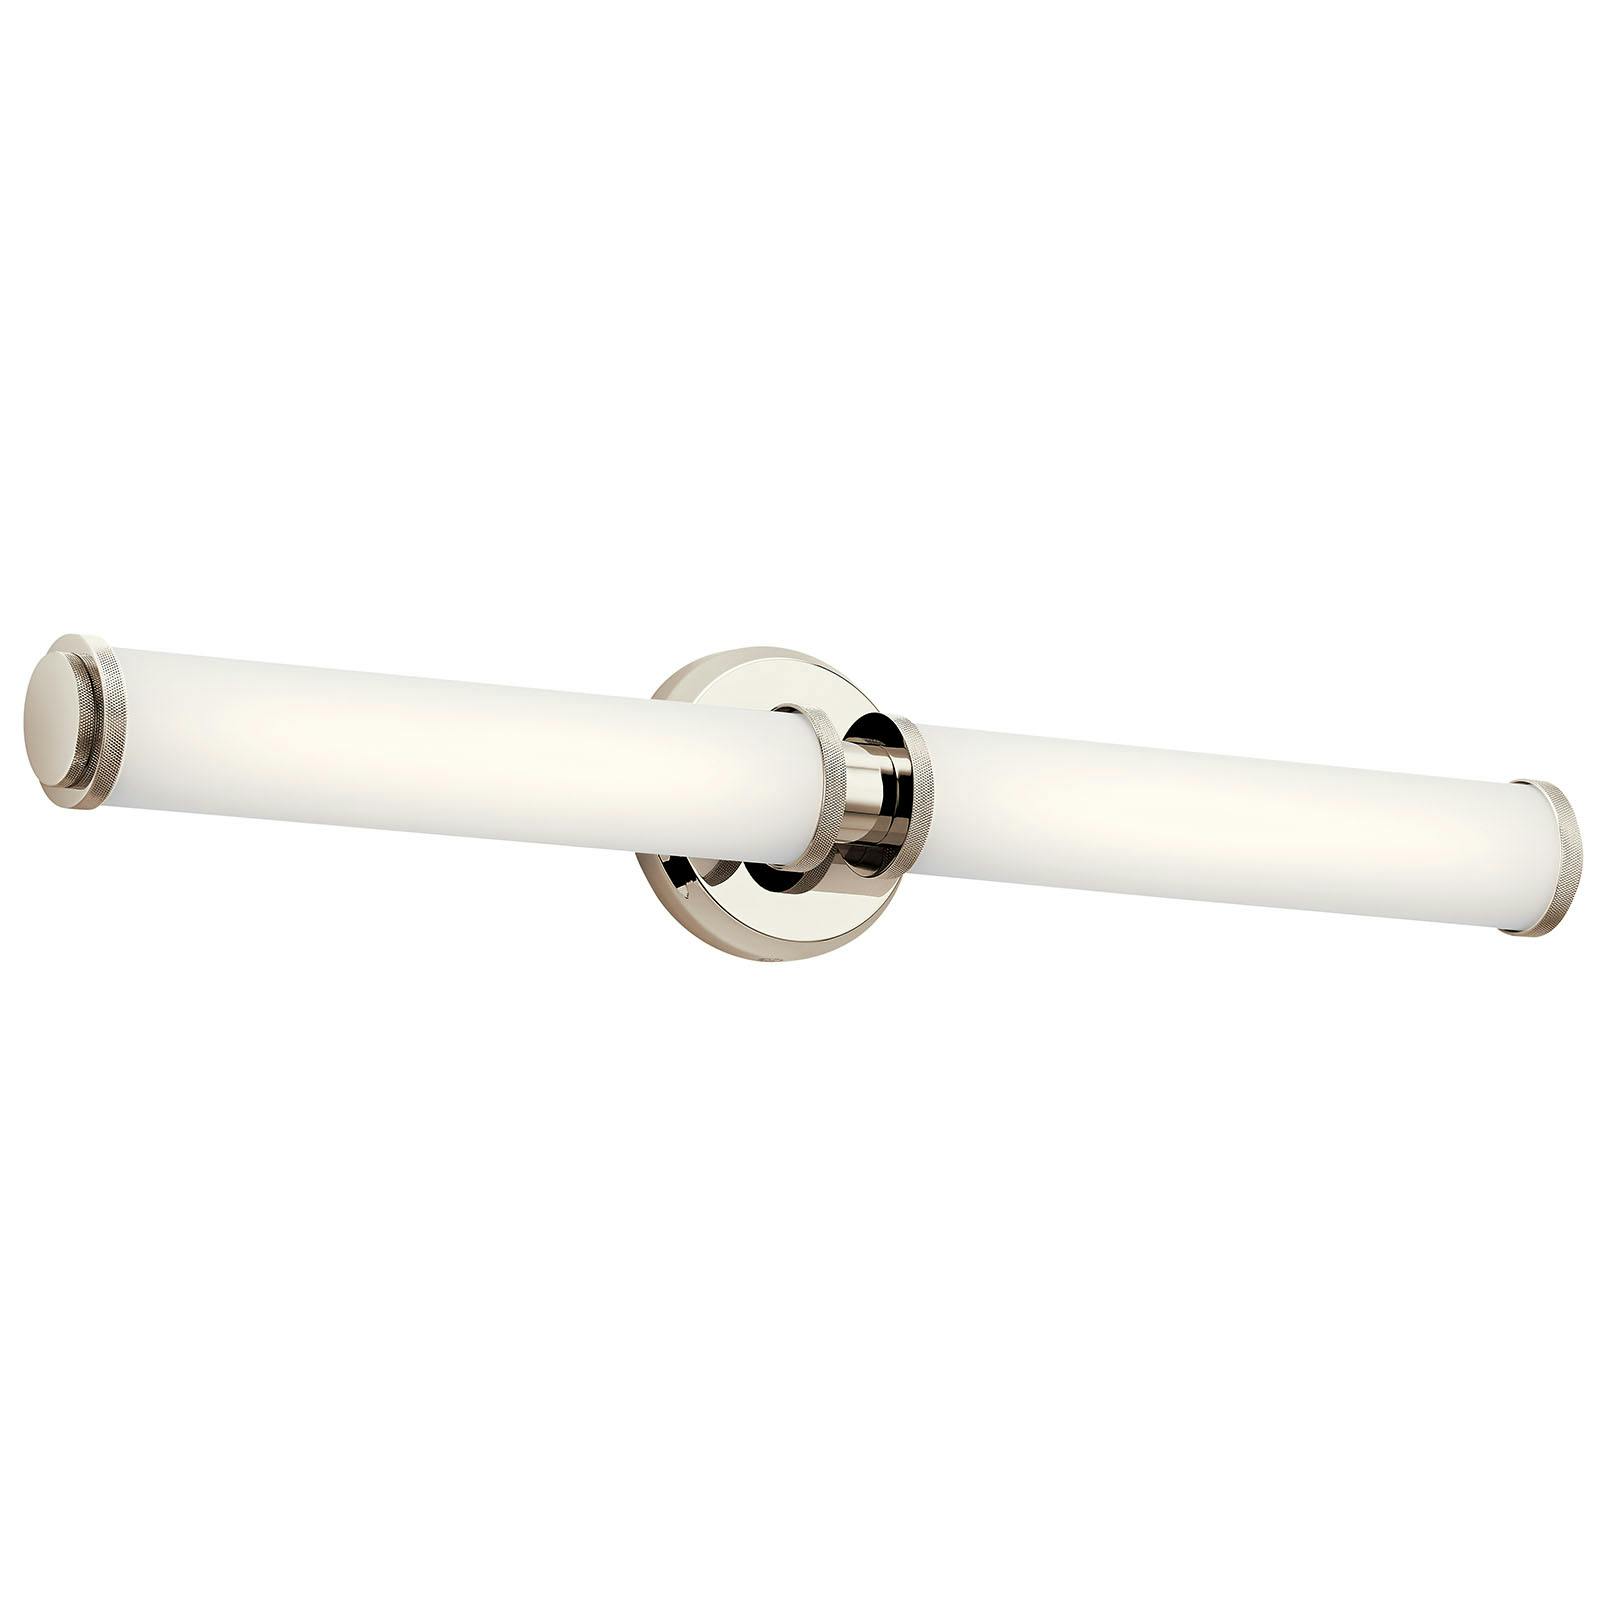 Product image of the 45685PNLED shown hung horizontally